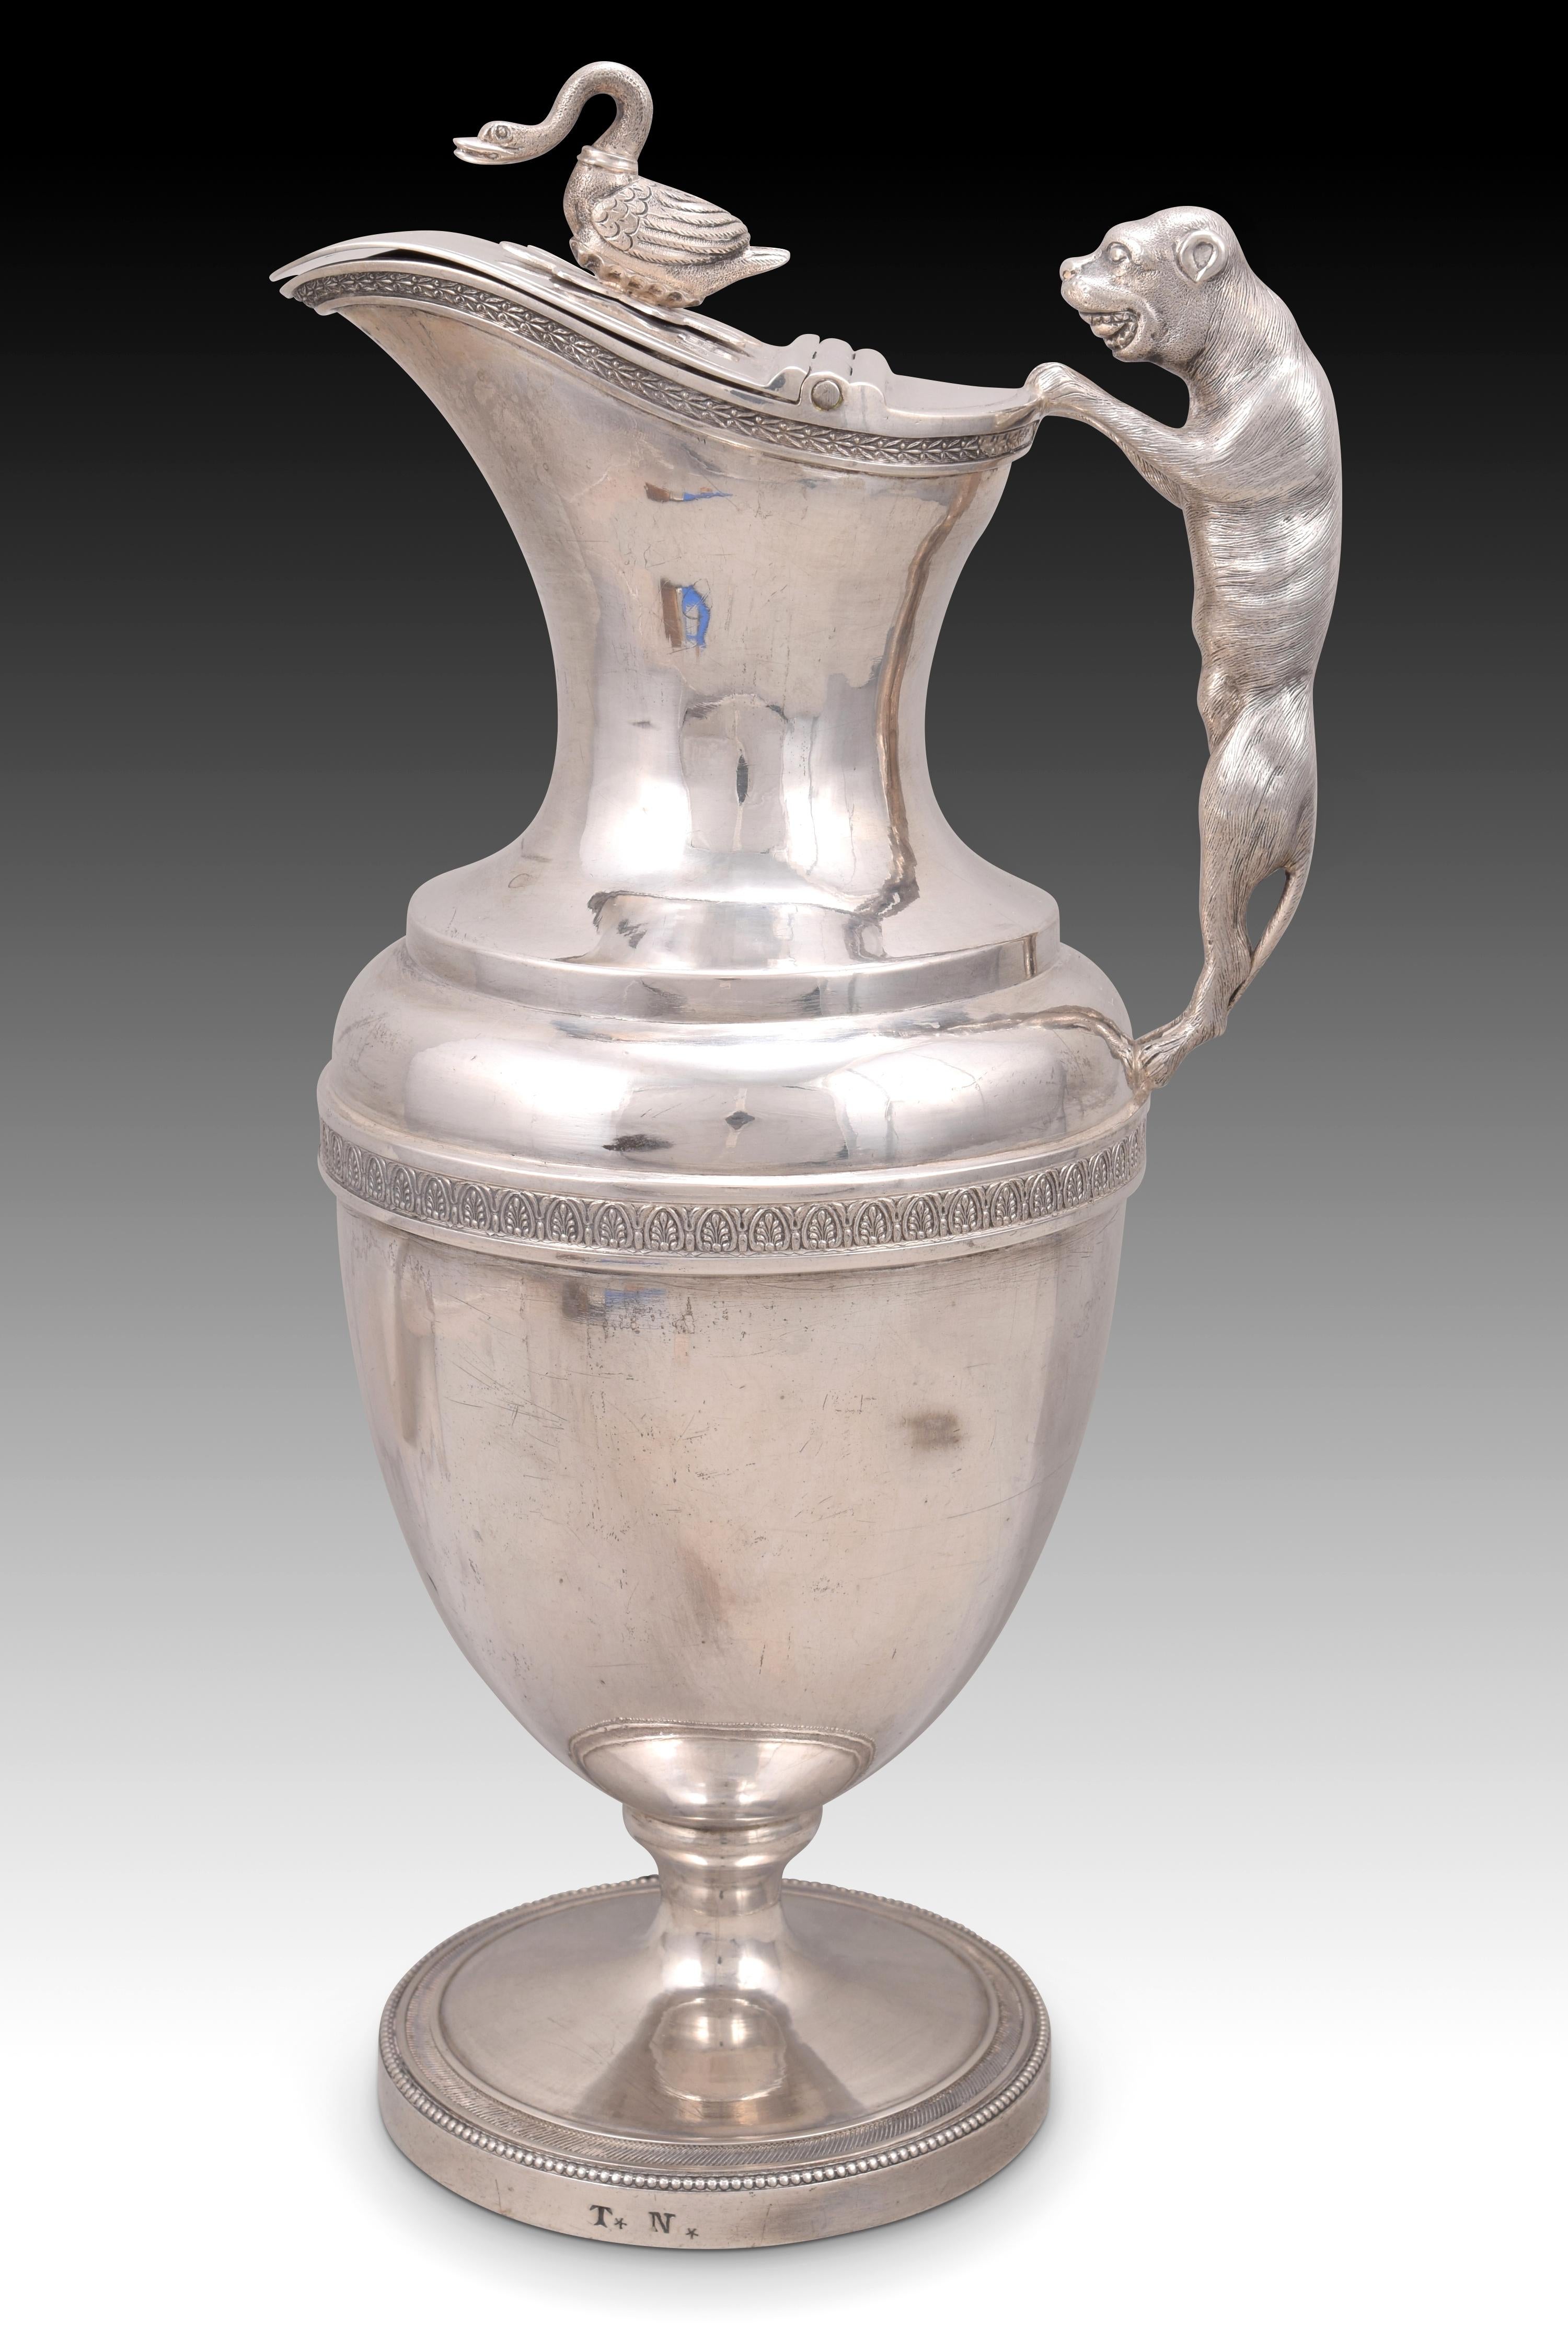 Jug. Silver. Vitoria, 18th-19th centuries. 
With contrasting and burilated marks, and property initials (TN). 
Published in Encyclopedia of Spanish and Viceregal American Silver. Bibliography: Fernández, Alejandro; Munoa, Raphael; Rabasco, Jorge.